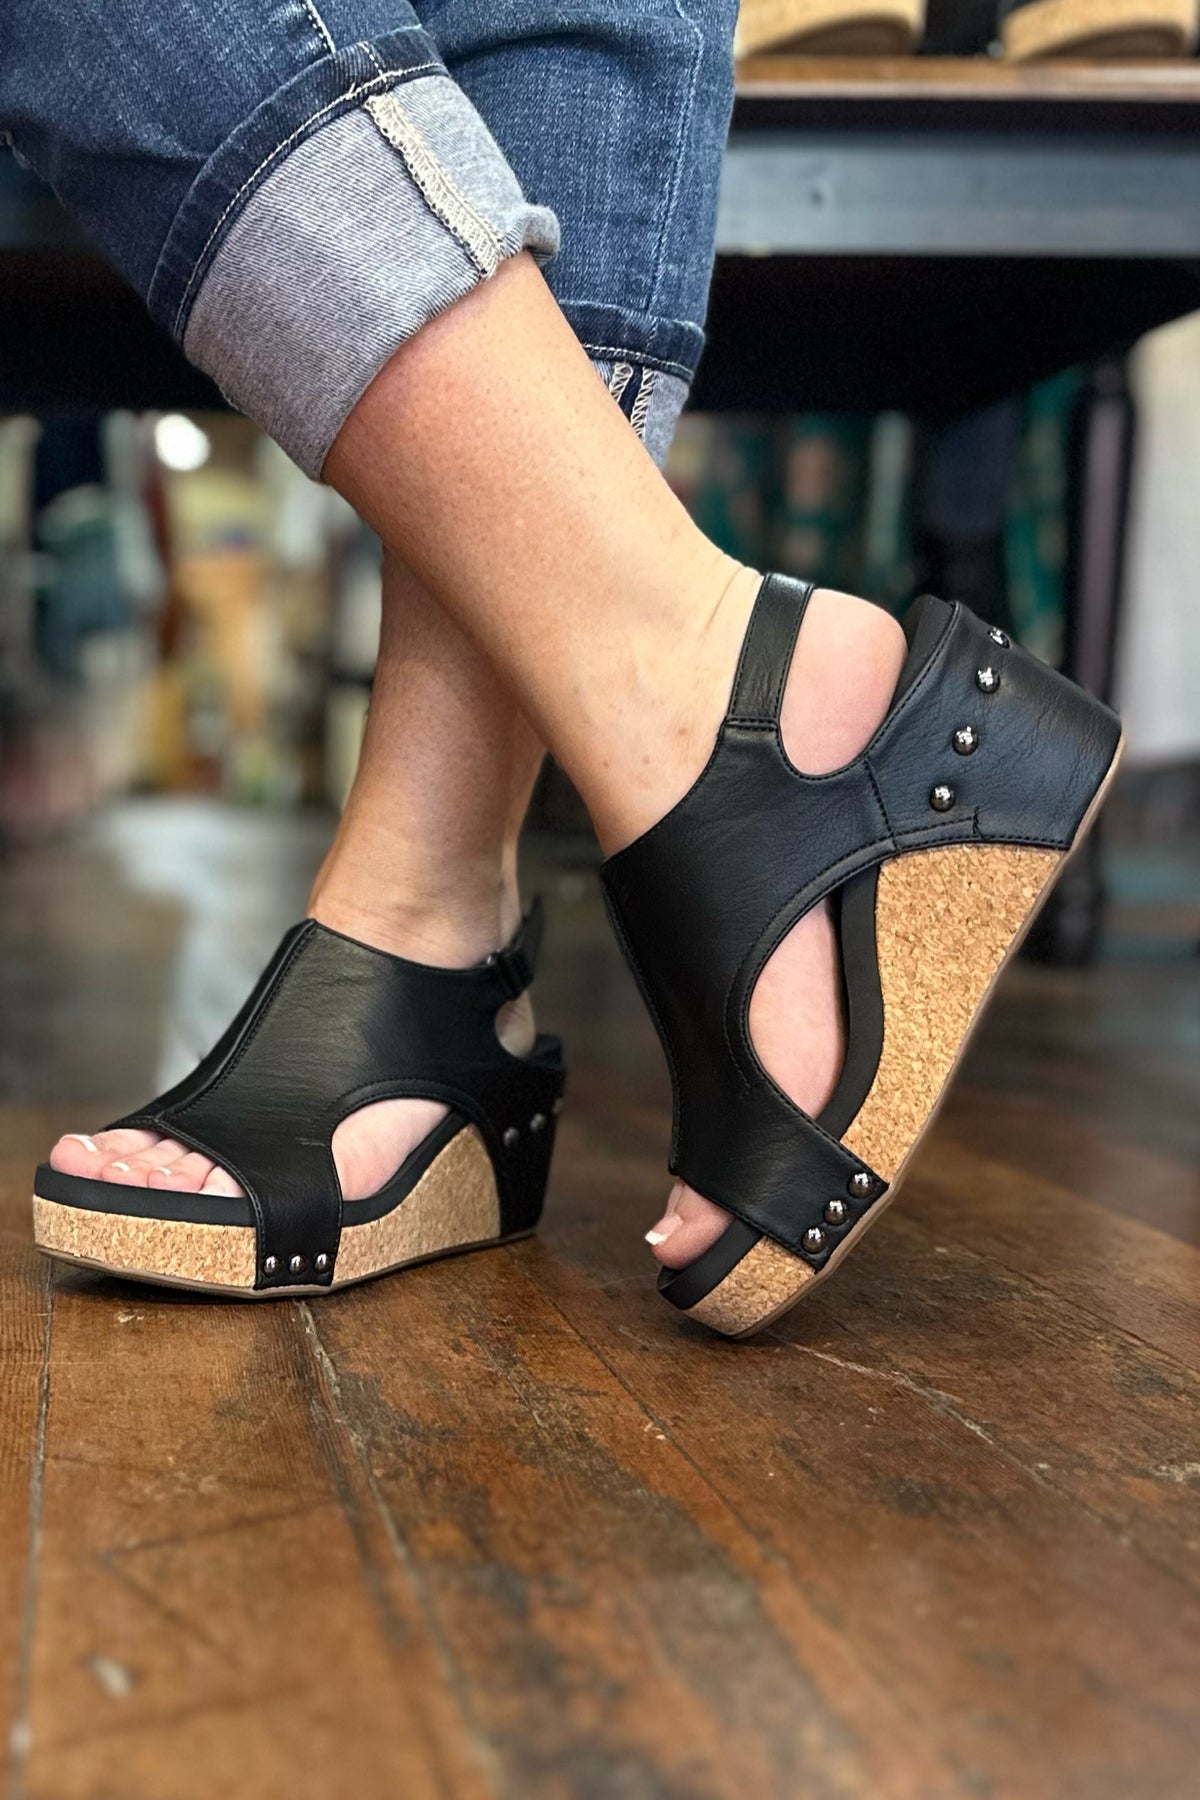 CARLEY By Corkys Black Smooth Wedge-Women's Shoes-Corkys-Gallop 'n Glitz- Women's Western Wear Boutique, Located in Grants Pass, Oregon